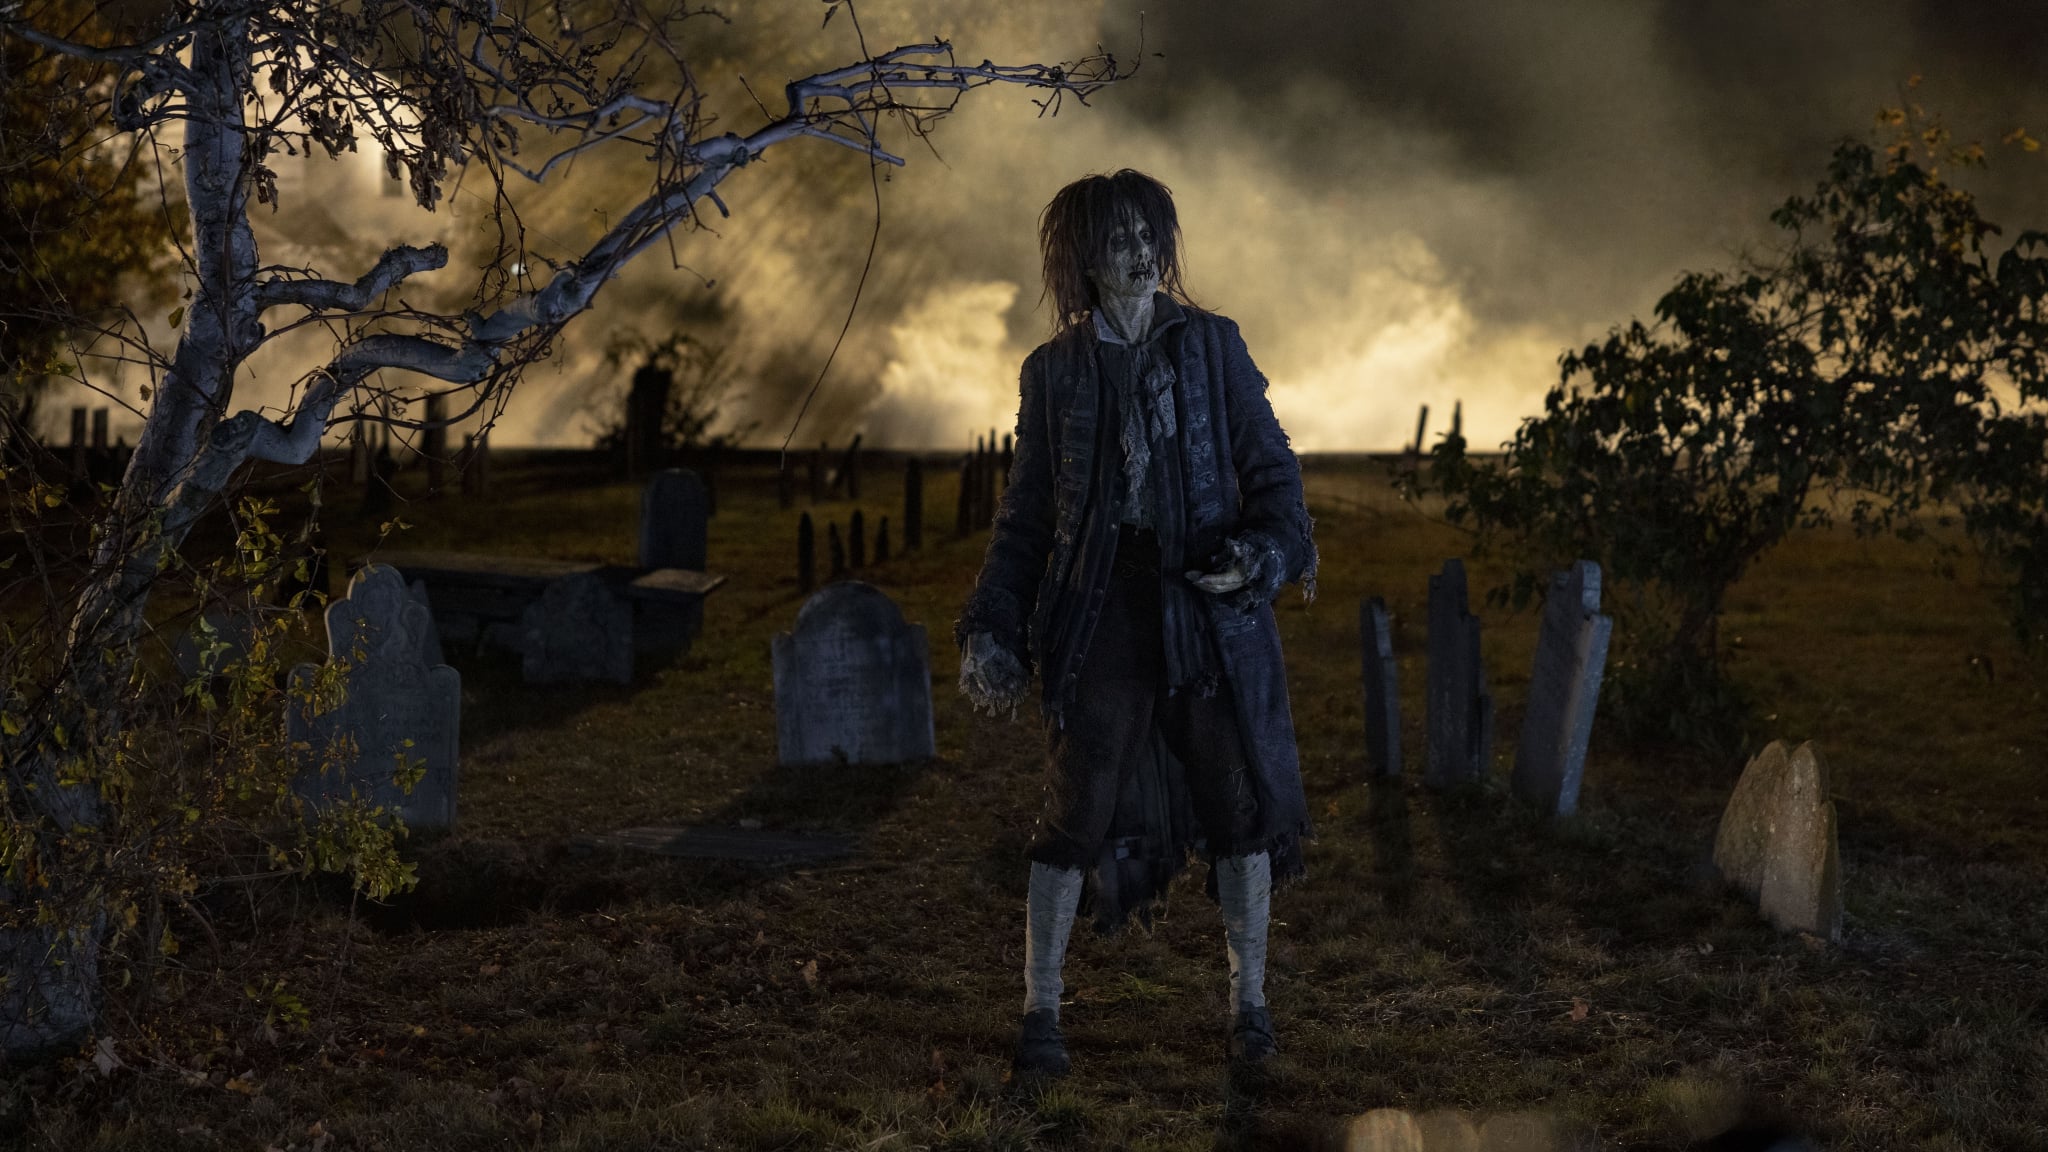 What It Was Like on the “Hocus Pocus 2” Set, From an Extra Who Lived the Magical Experience